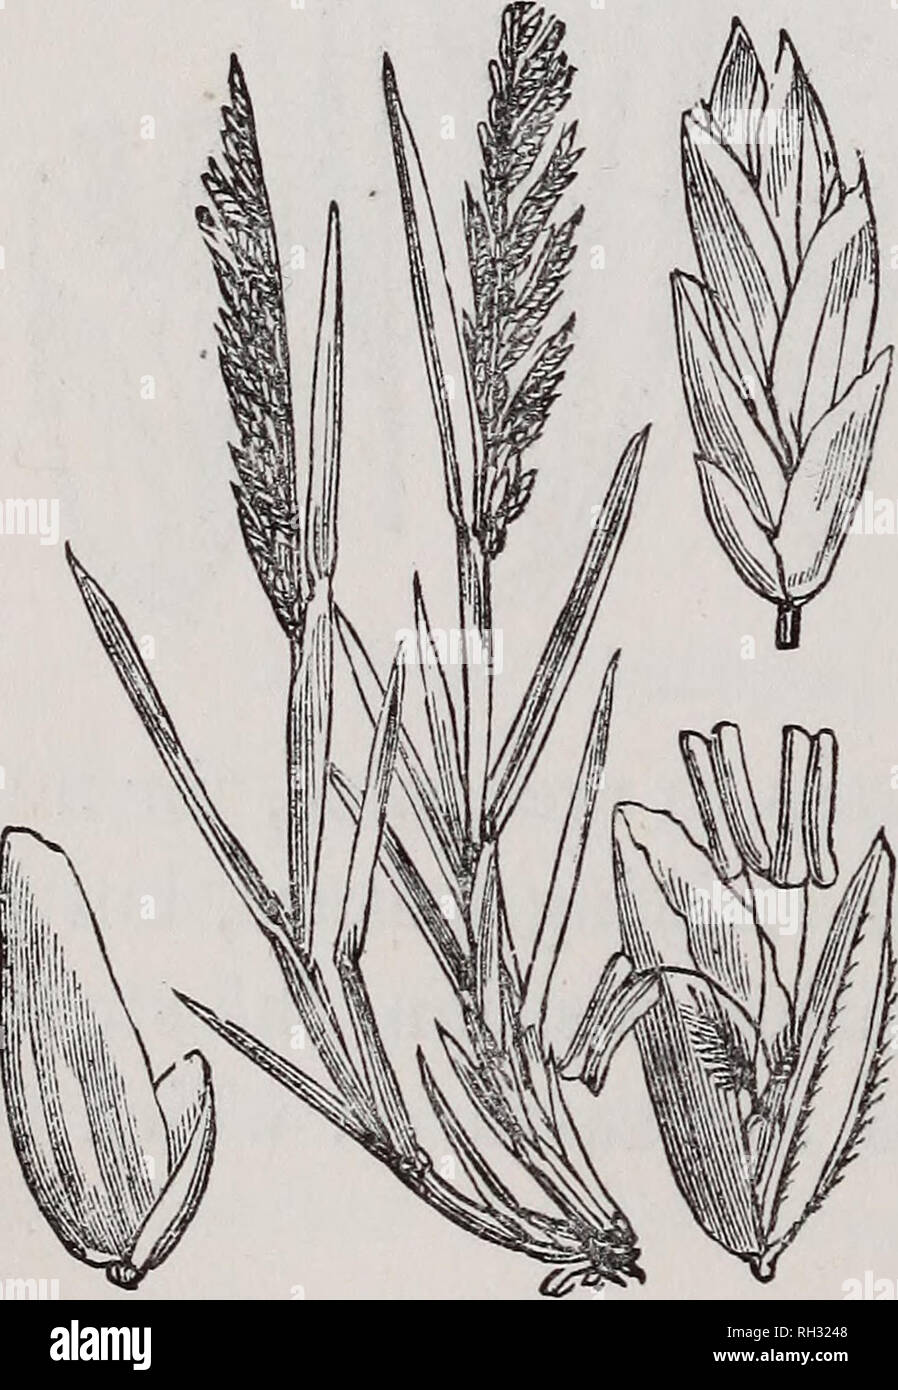 . British grasses : an introduction to the study of the Gramineae of Great Britain and Ireland. Grasses. 266 BRITISH GRASSES. 5. Poa procumbens, Curt. Procumbent Poa. Root annual; stem decumbent, round, smooth, slender, from six inches to a foot in length; leaves flat, ribbed, rough on the inner surface, smooth behind, acute; upper sheath longer than its leaf; panicle lanceolate, dense, turned one way, compound; rachis and branches rough, round, never deflexed; spikelets linear, cylindrical, containing about five florets ; outer glumes very small indeed ; flower- ing glumes five-ribbed, the ce Stock Photo